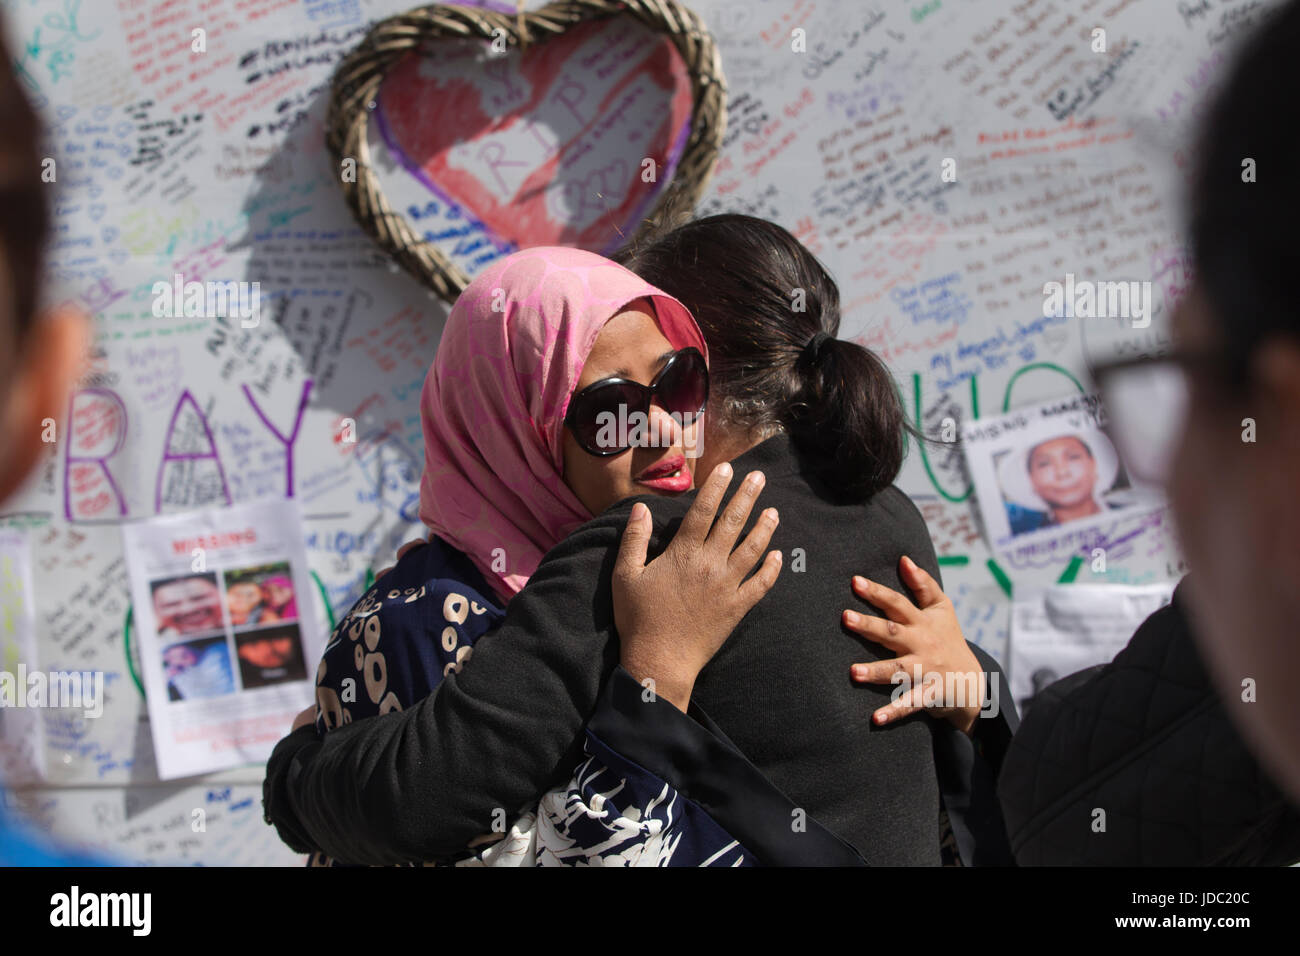 People leave tributes on a wall off condolence to the victims who died Grenfell Tower, the 27-storey tower block fire in west London, England, UK Stock Photo